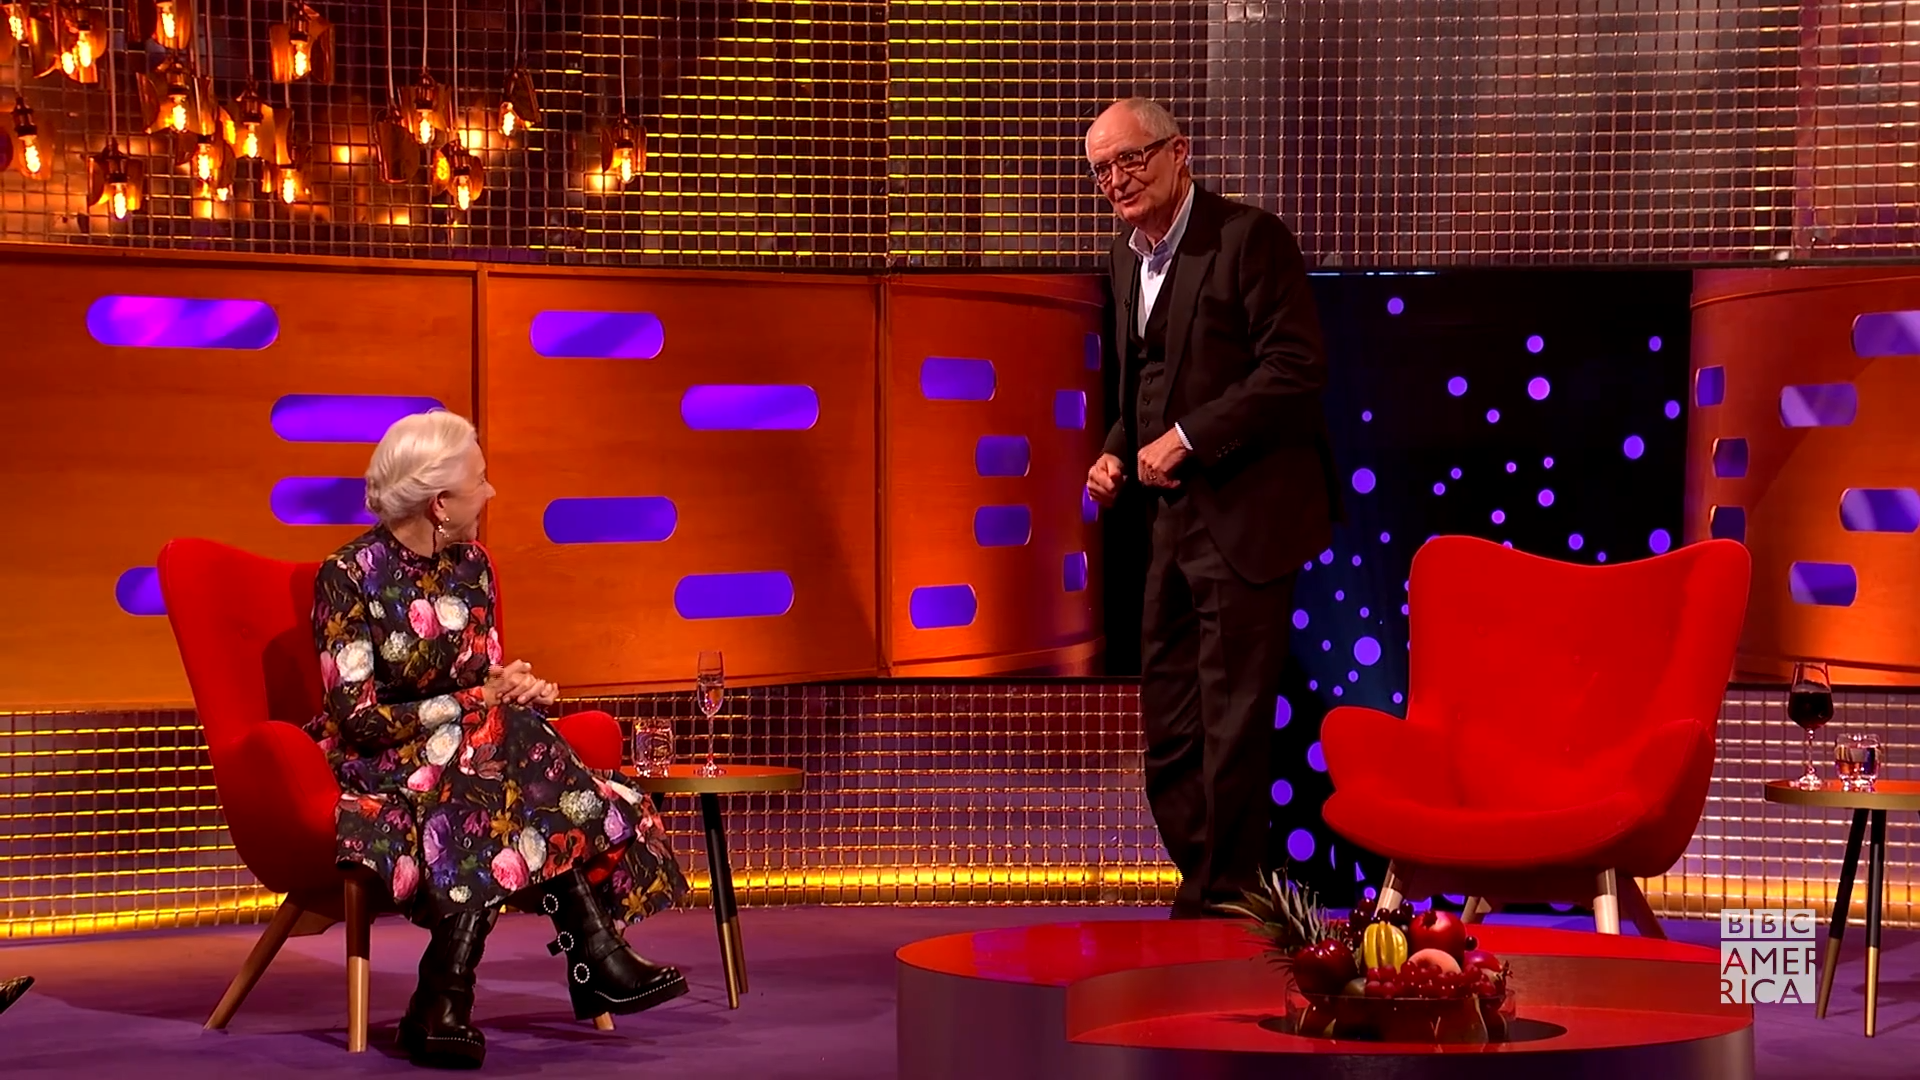 Watch Jim Broadbent Snuck a Dad Dance Into ‘Moulin Rouge!’ | The Graham Norton Show Video Extras